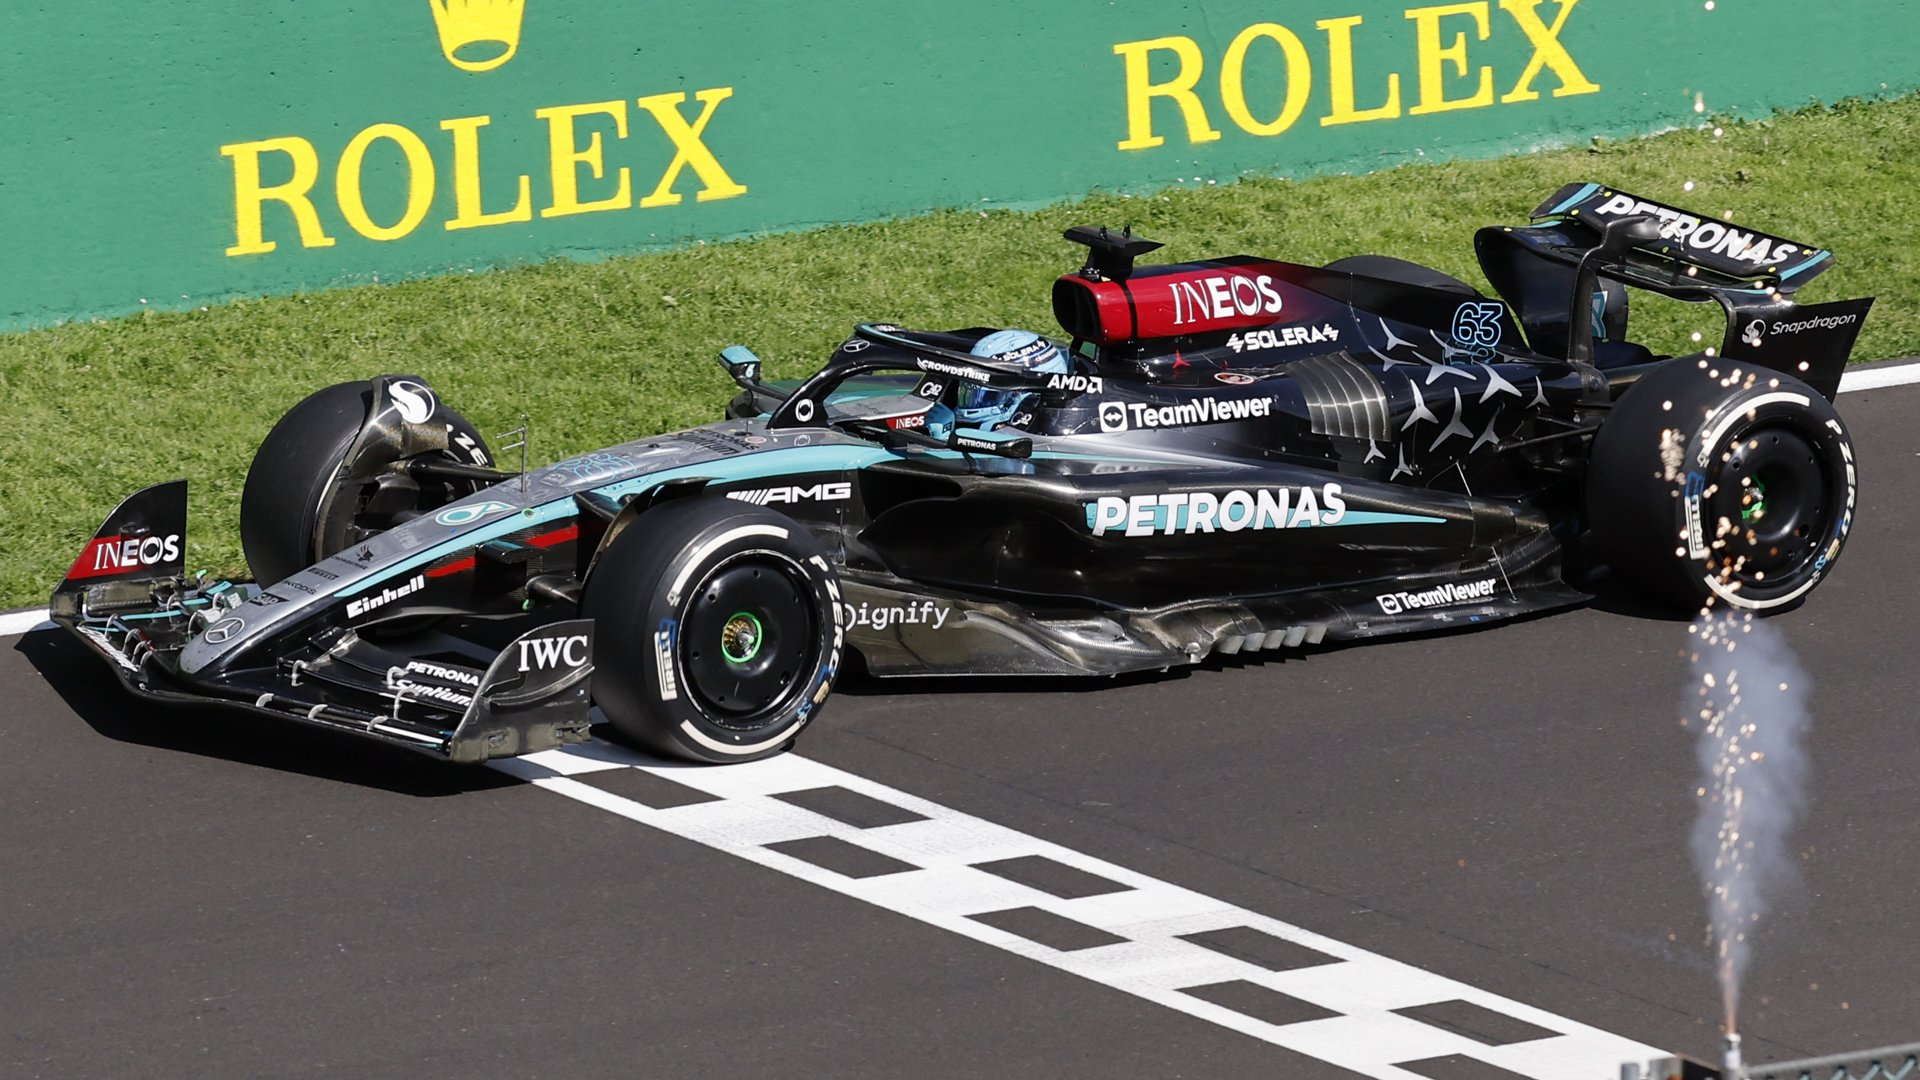 George Russell BEATS Lewis Hamilton in F1 Belgian Grand Prix after dramatic late battle with incredible strategy